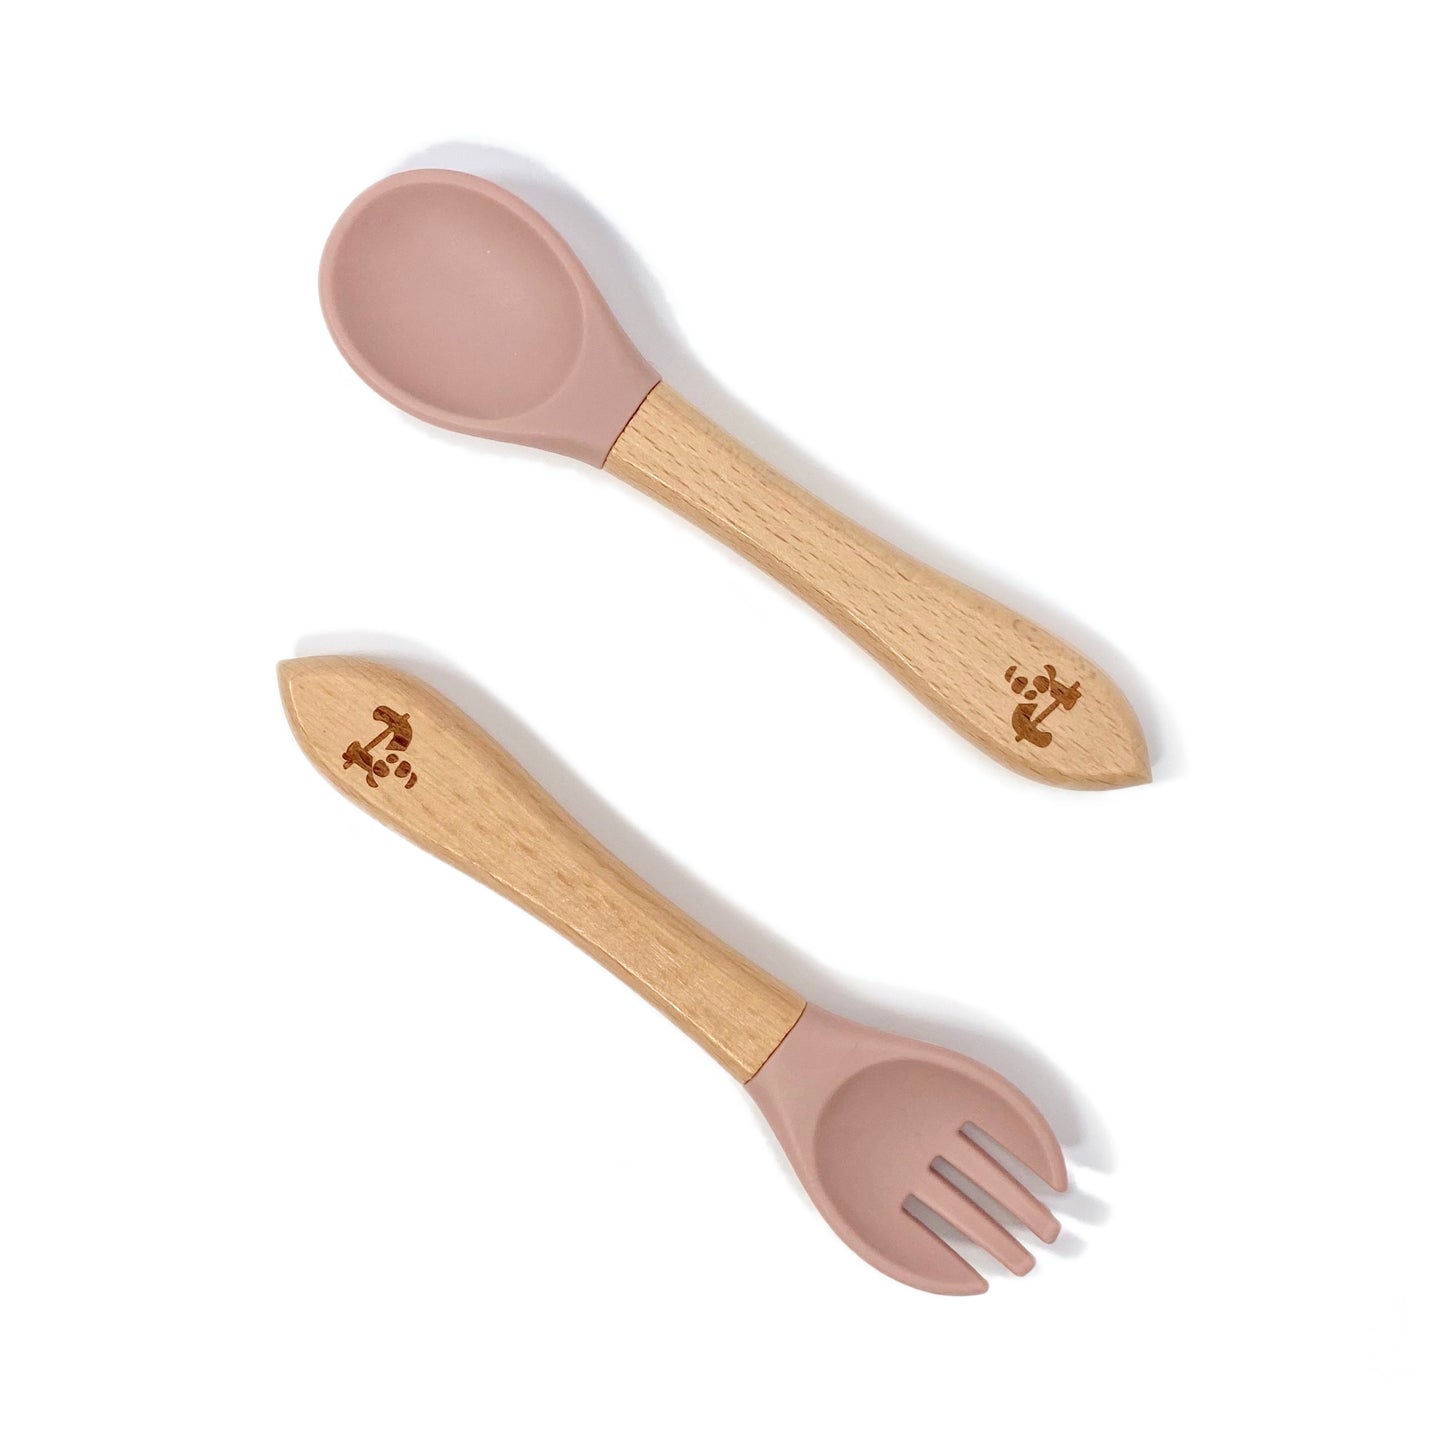 A set of children’s bamboo and silicone cutlery, in blossom pink colour.